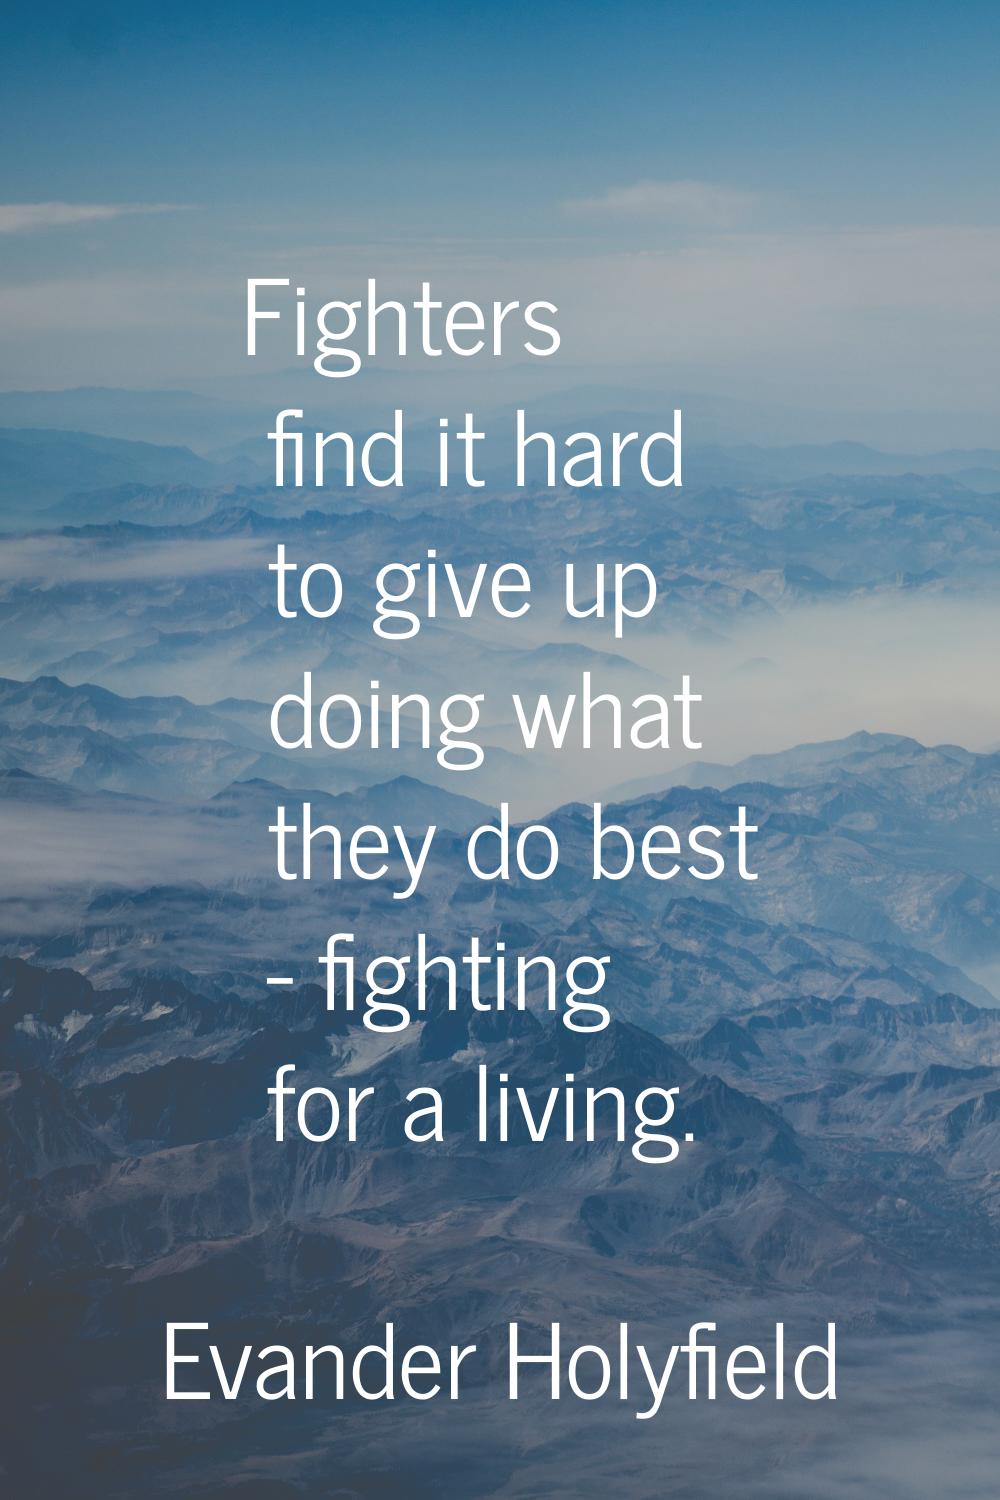 Fighters find it hard to give up doing what they do best - fighting for a living.